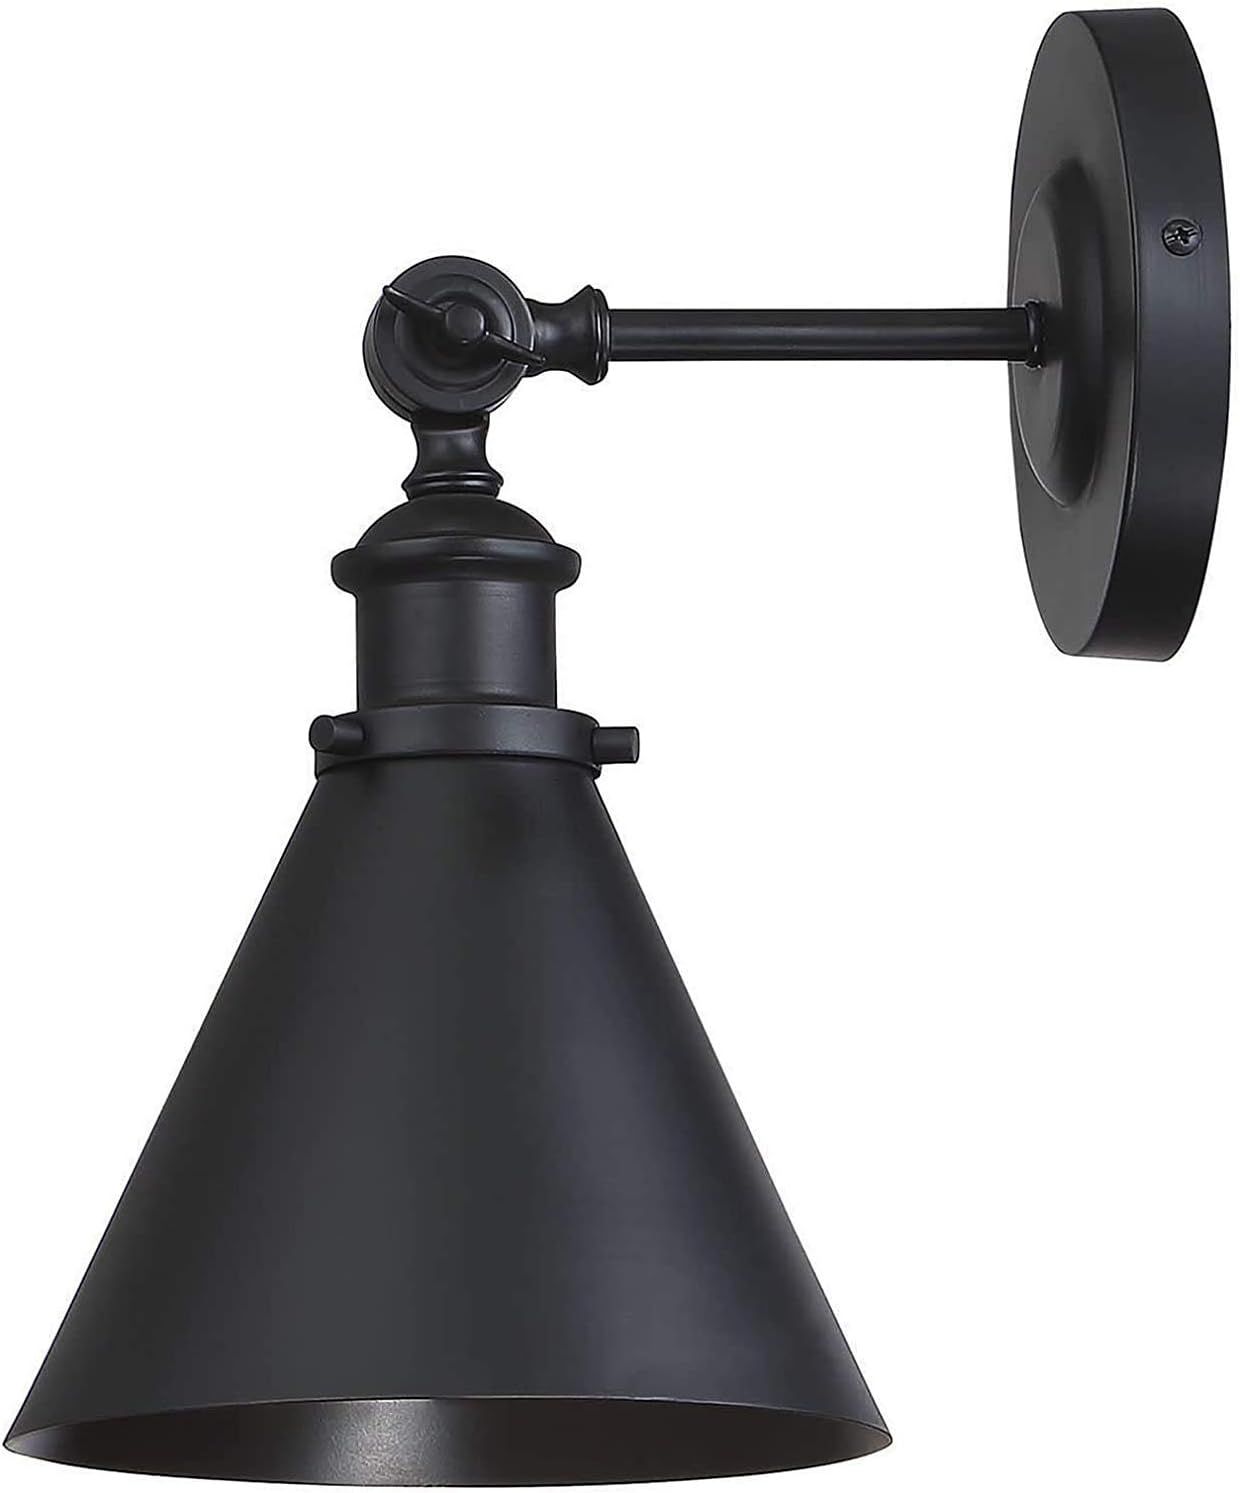 Modern Farmhouse Matte Black Barn Light with a Metal Conical Shade Vintage Retro Wall Sconce | Amazon (US)